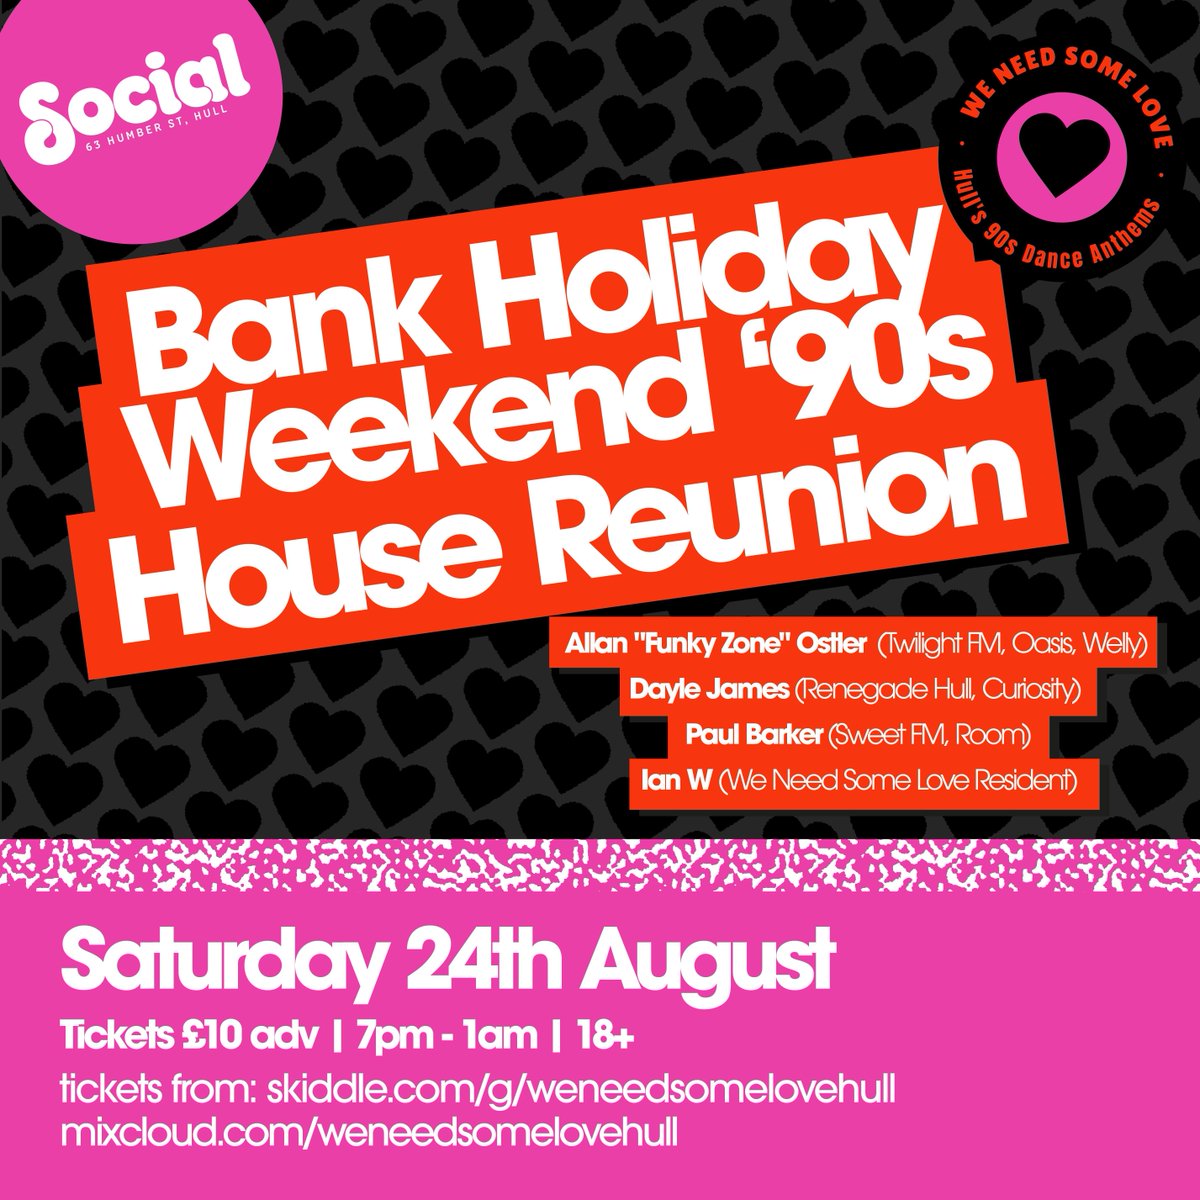 // JUST ANNOUNCED // ON SALE // We Need Some Love hosts an epic House Reunion this August Bank Holiday weekend, playing all the 90s Dance classics from Juliets, Room, Welly and Oasis! 📅 Saturday 24th August 🎟 book tickets: bit.ly/WeNeedSomeLove